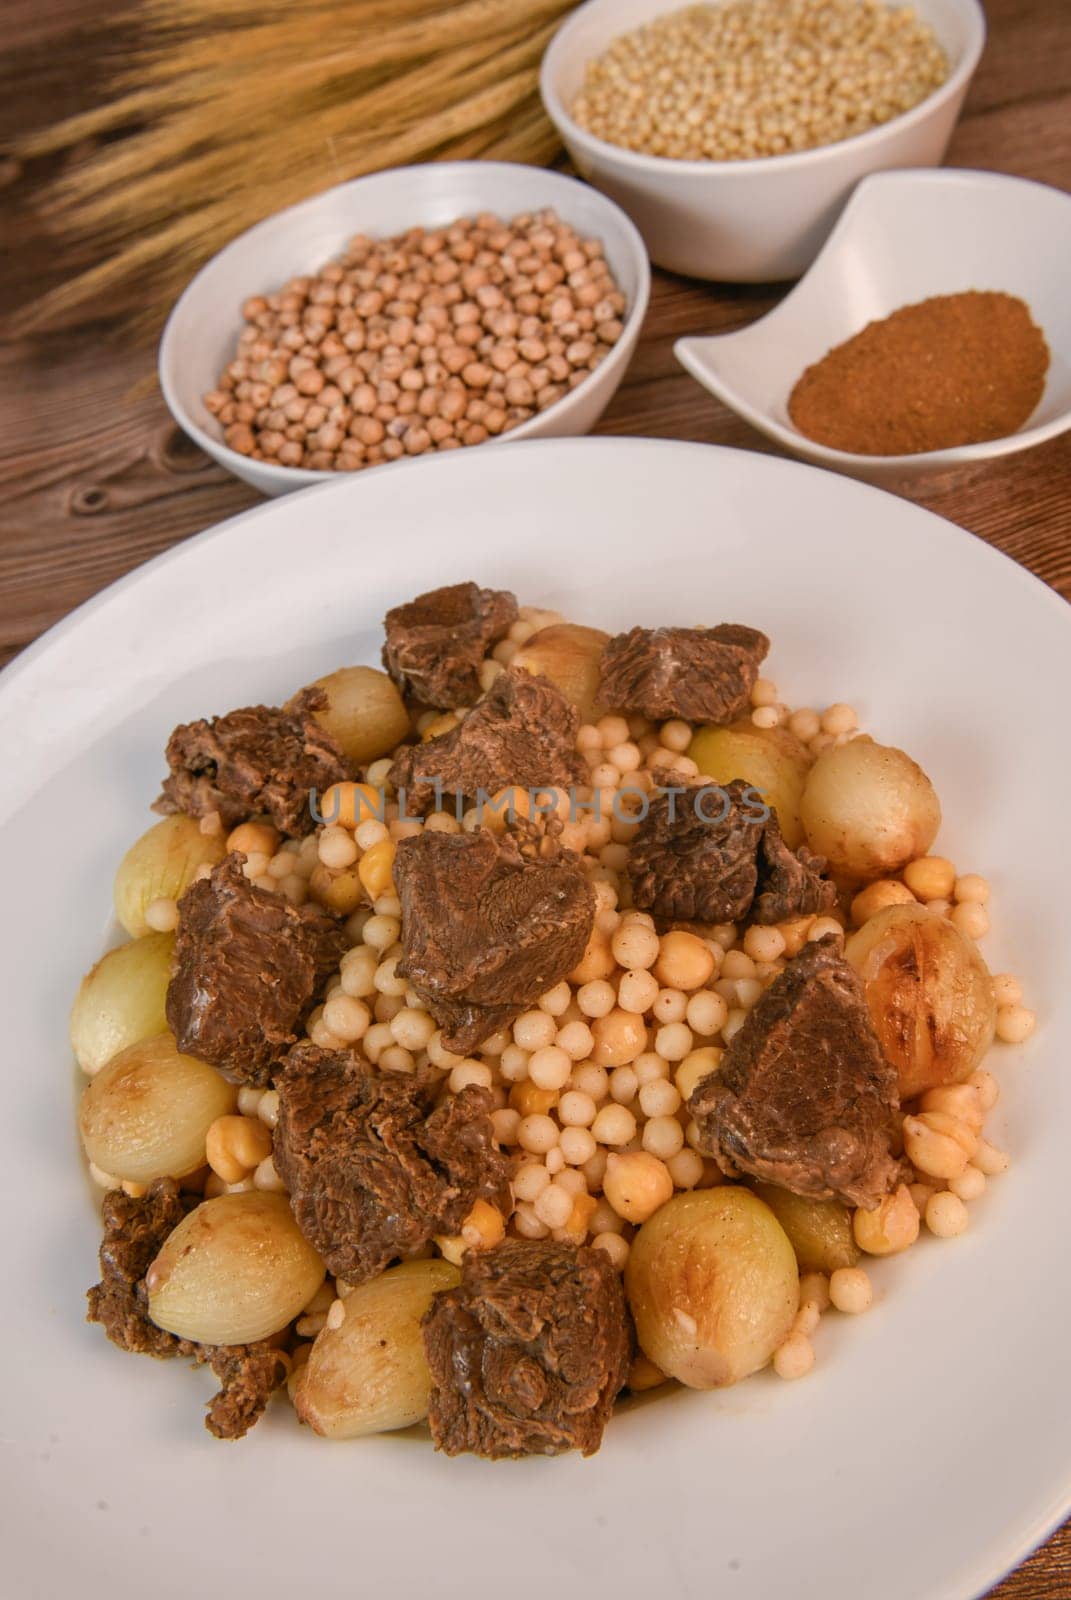 Moughrabieh is a popular dish, LEBANESE RECIPE FOR MOUGHRABIEH WITH BEEF AND SMALL ONIONS, SEMOLINA PEARLS AND CHICKPEAS by FreeProd